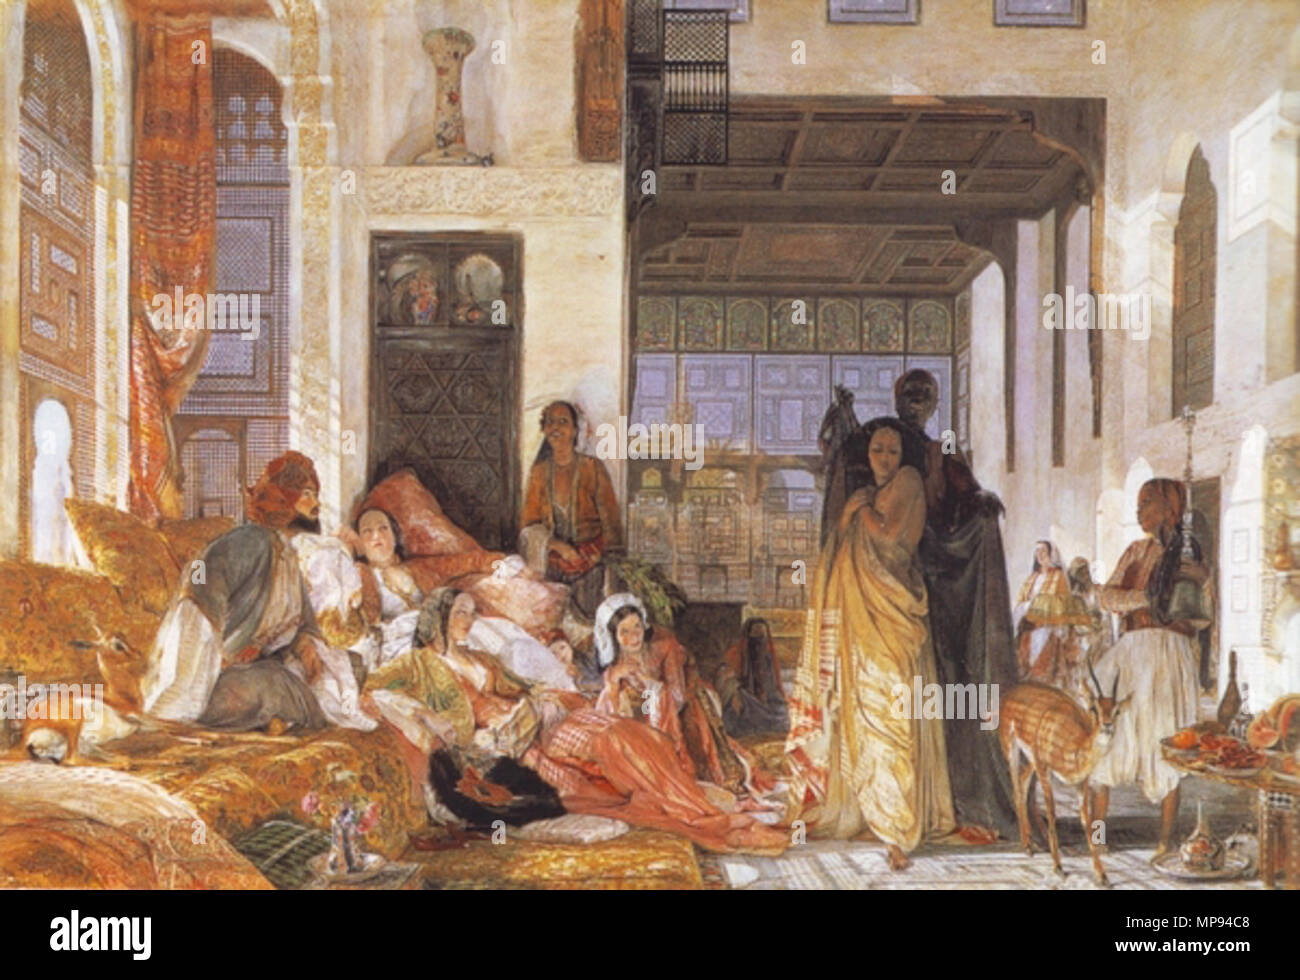 . English: The Harem - Introduction of an Abyssinian slave by J.F. Lewis (1805-1876) . 1860s.   John Frederick Lewis  (1805–1876)     Alternative names J. F. Lewis; John Frederick Lewis (1805-1876); Spanish Lewis; J.F. Lewis  Description British painter and printmaker  Date of birth/death 14 July 1805 15 August 1876  Location of birth/death London Walton-on-Thames  Work location London, Kairo  Authority control  : Q1391078 VIAF: 35335176 ISNI: 0000 0000 6681 7858 ULAN: 500007820 LCCN: nr95029881 NLA: 40125980 WorldCat 808 Lewis Harem Stock Photo